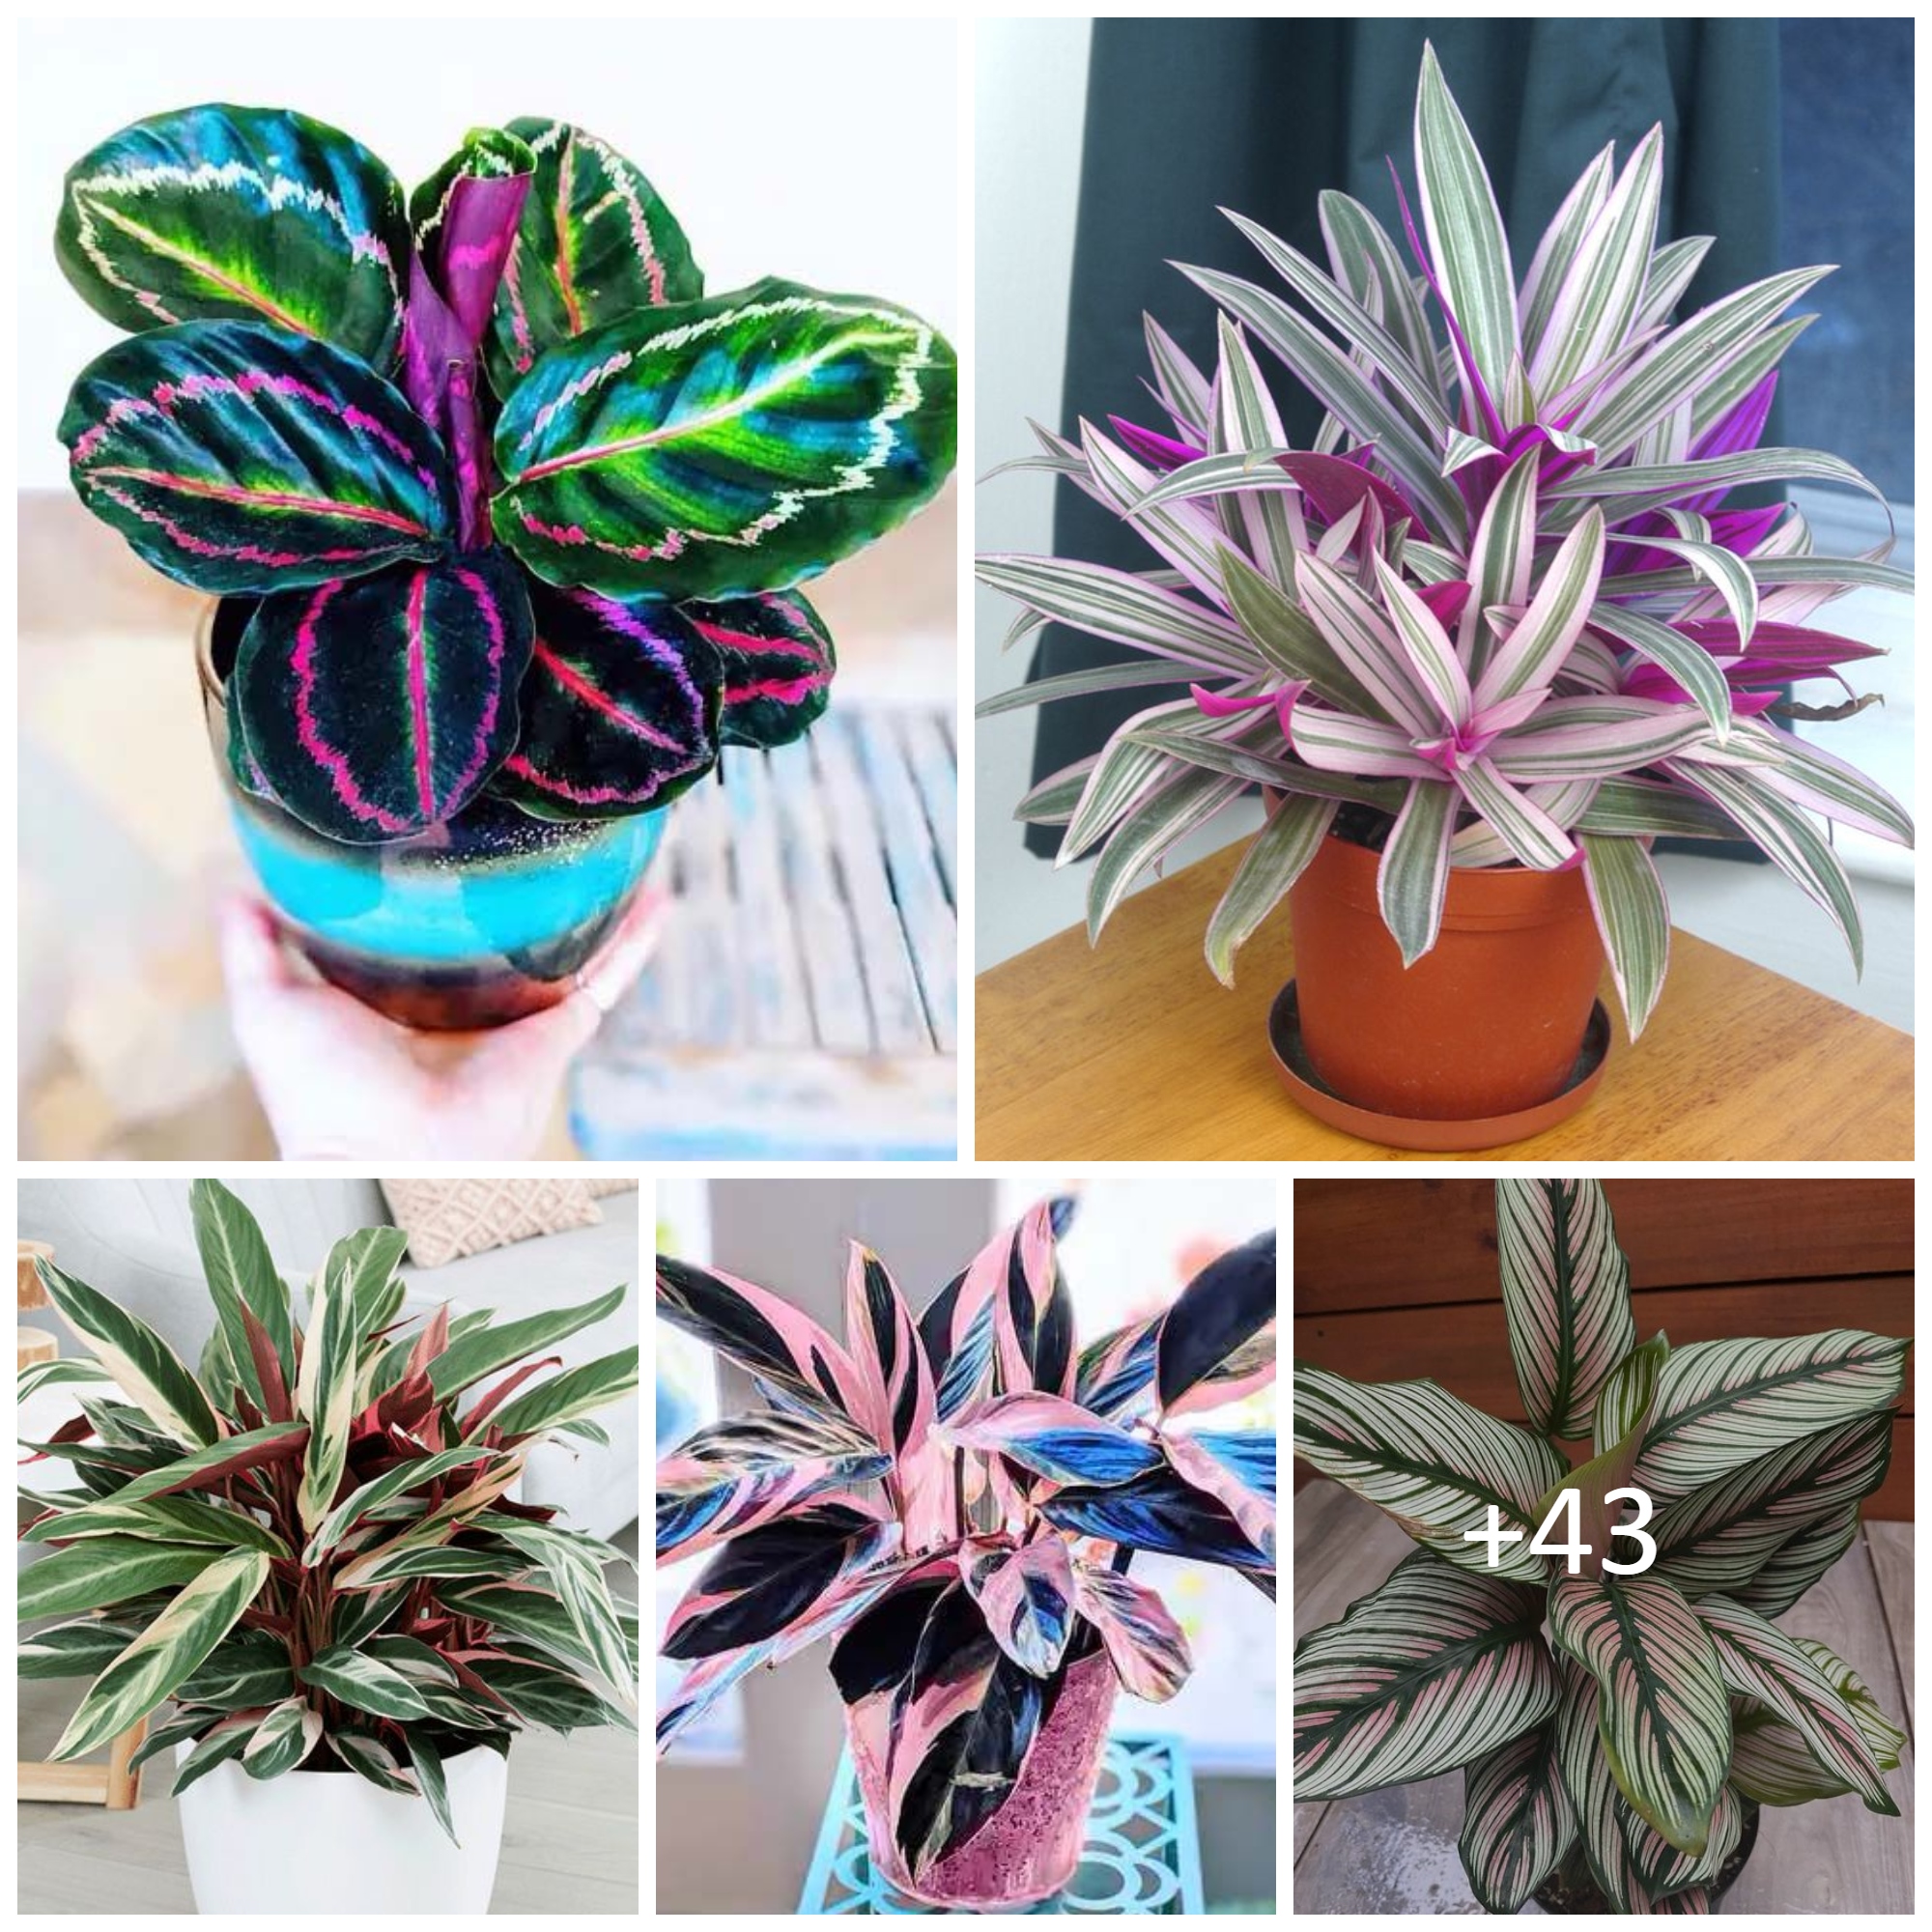 House plants with style